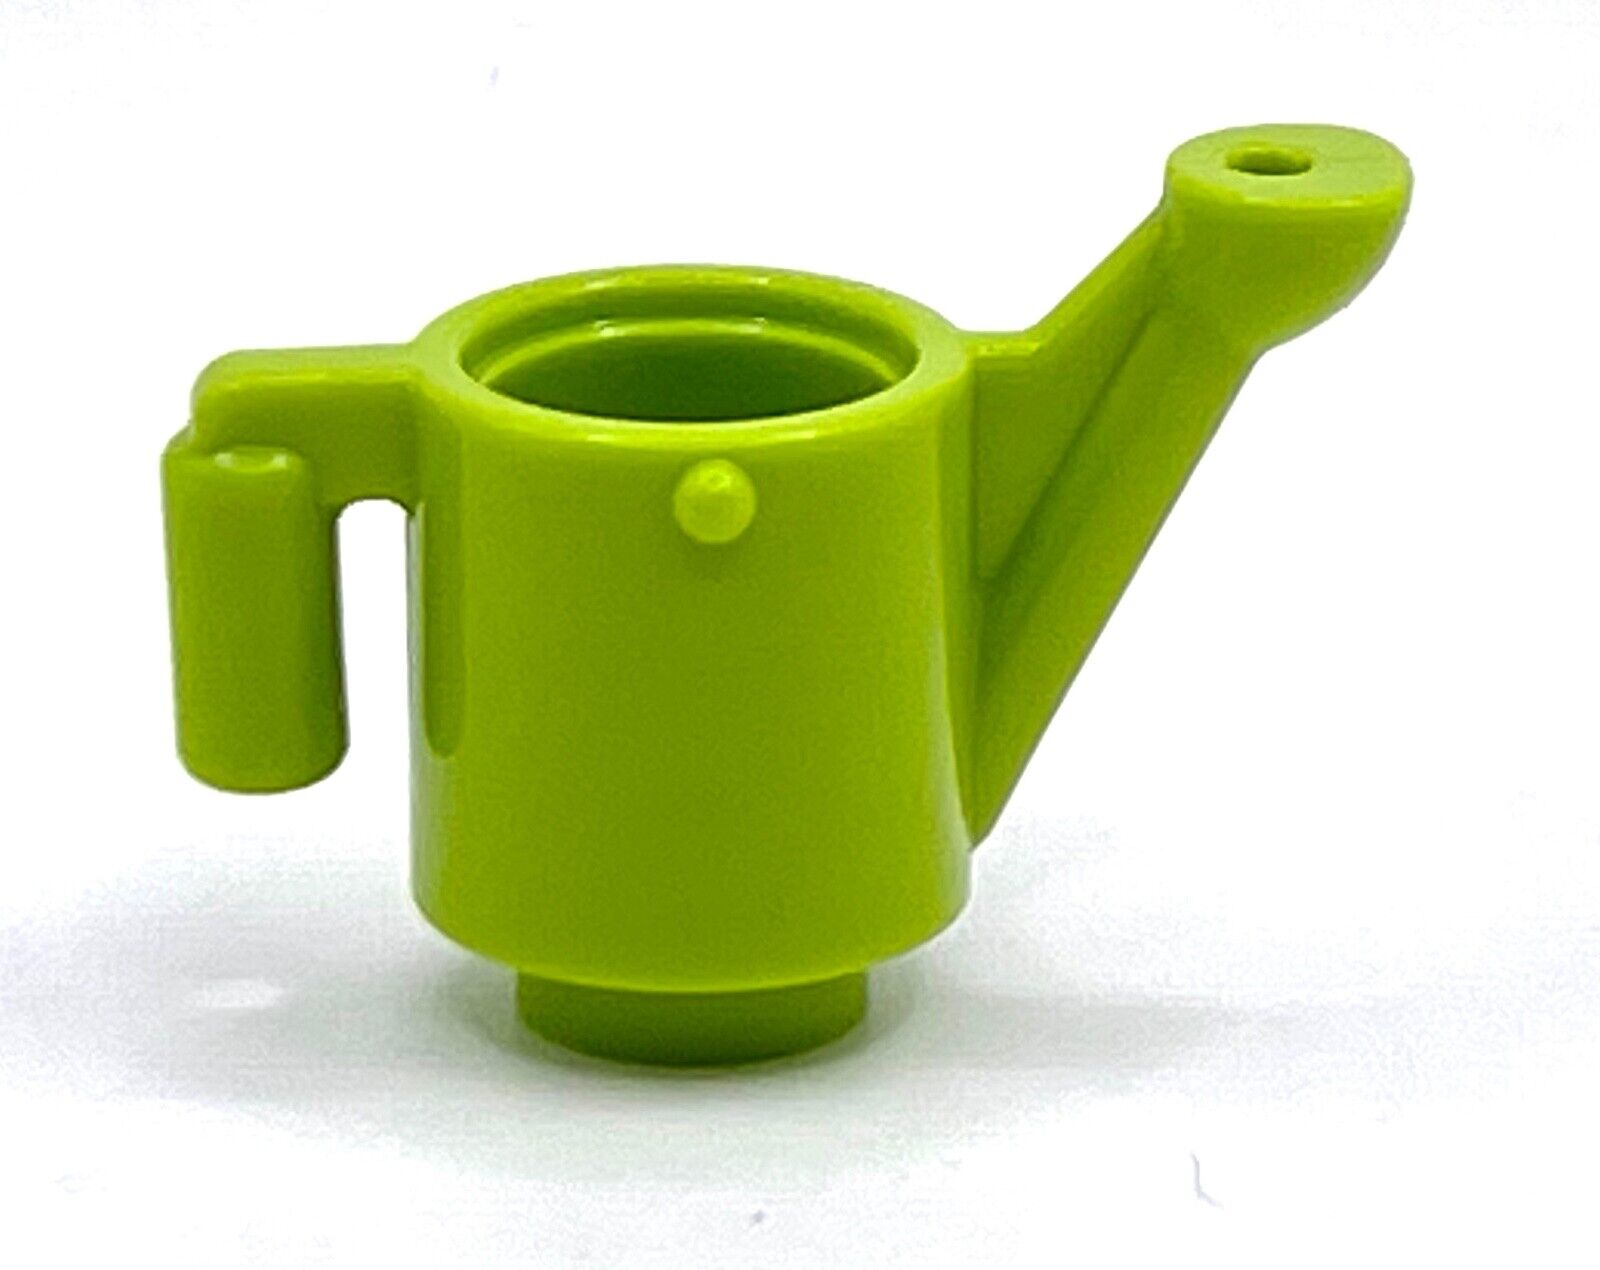 Lego Lime Green Watering Can MINIFIG Tool Accessory Barn Garden House Plants NEW